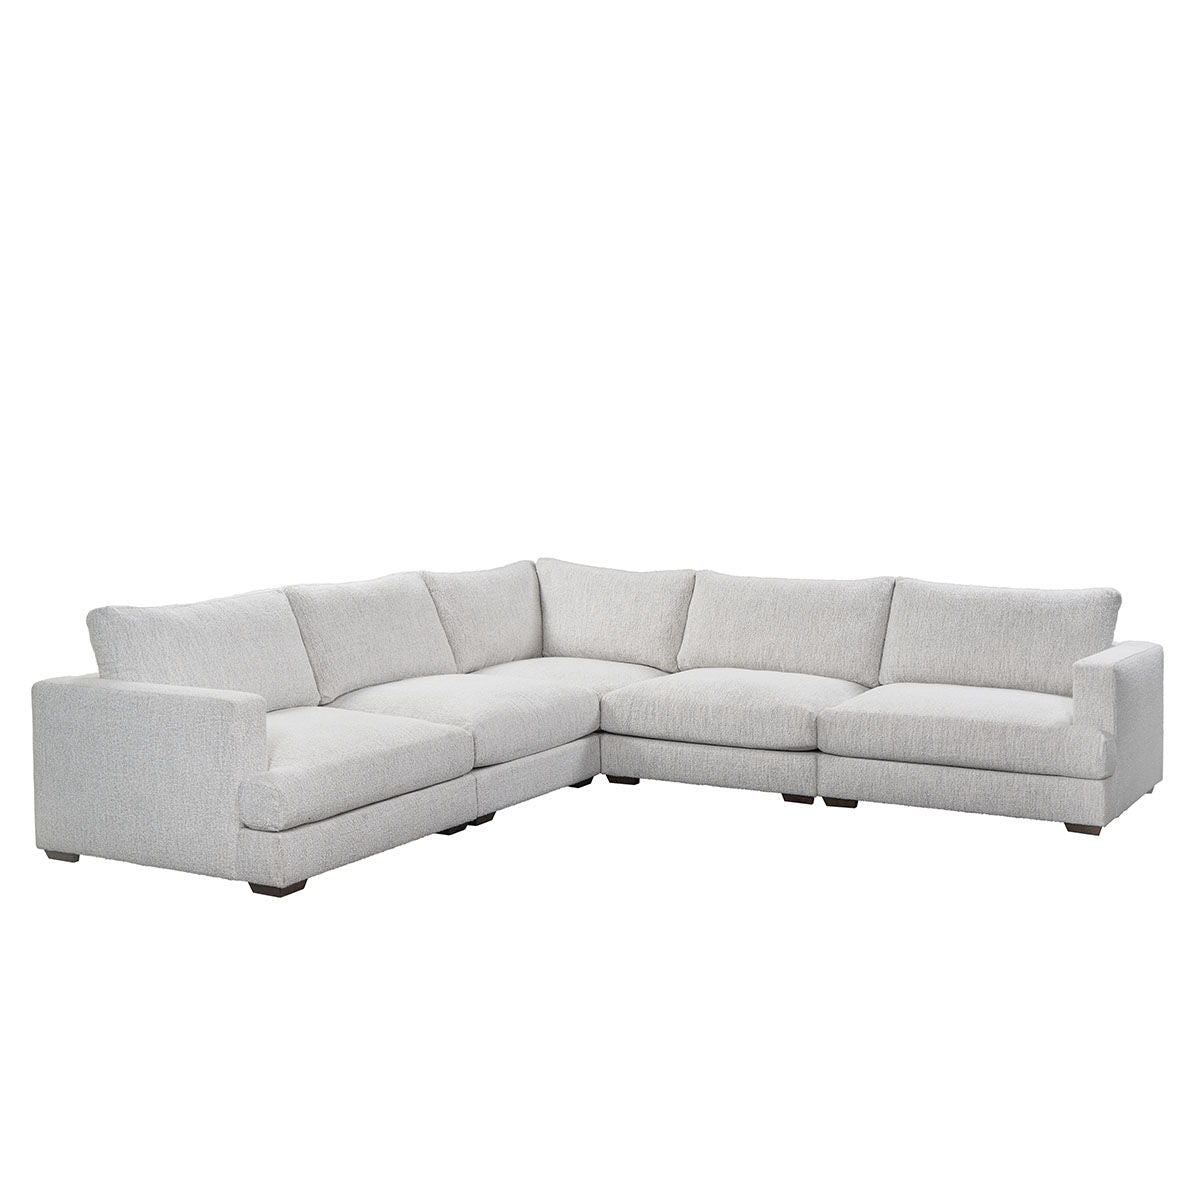 Ludwig - Upholstered 5 Piece Sectional - Ivory